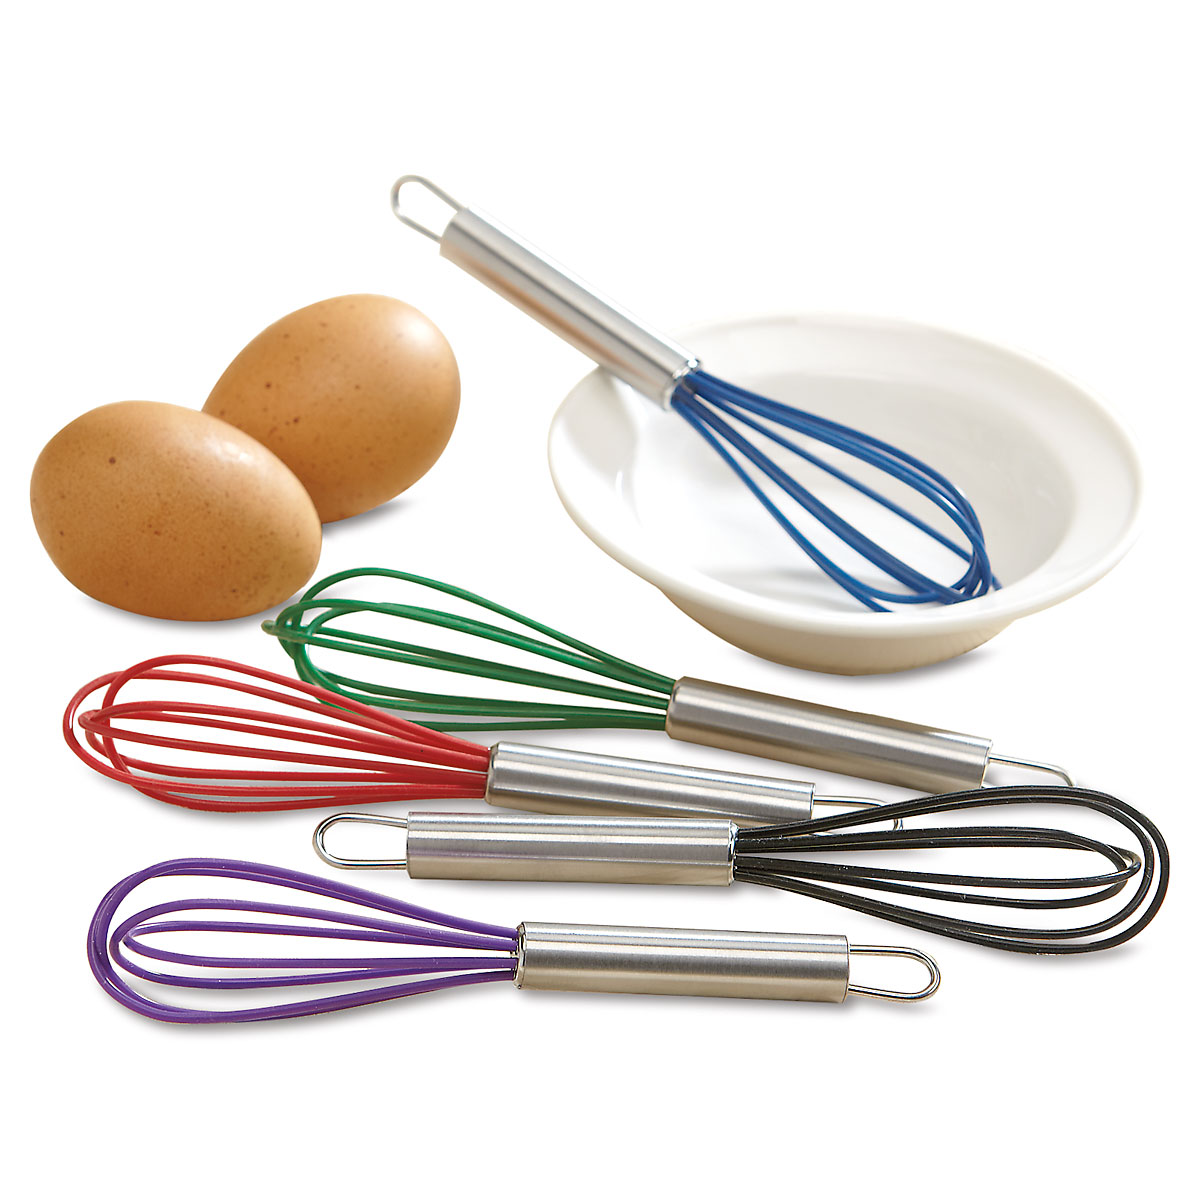 Art & Cook Silicone Mini Whisks, Set of 2 - Blue